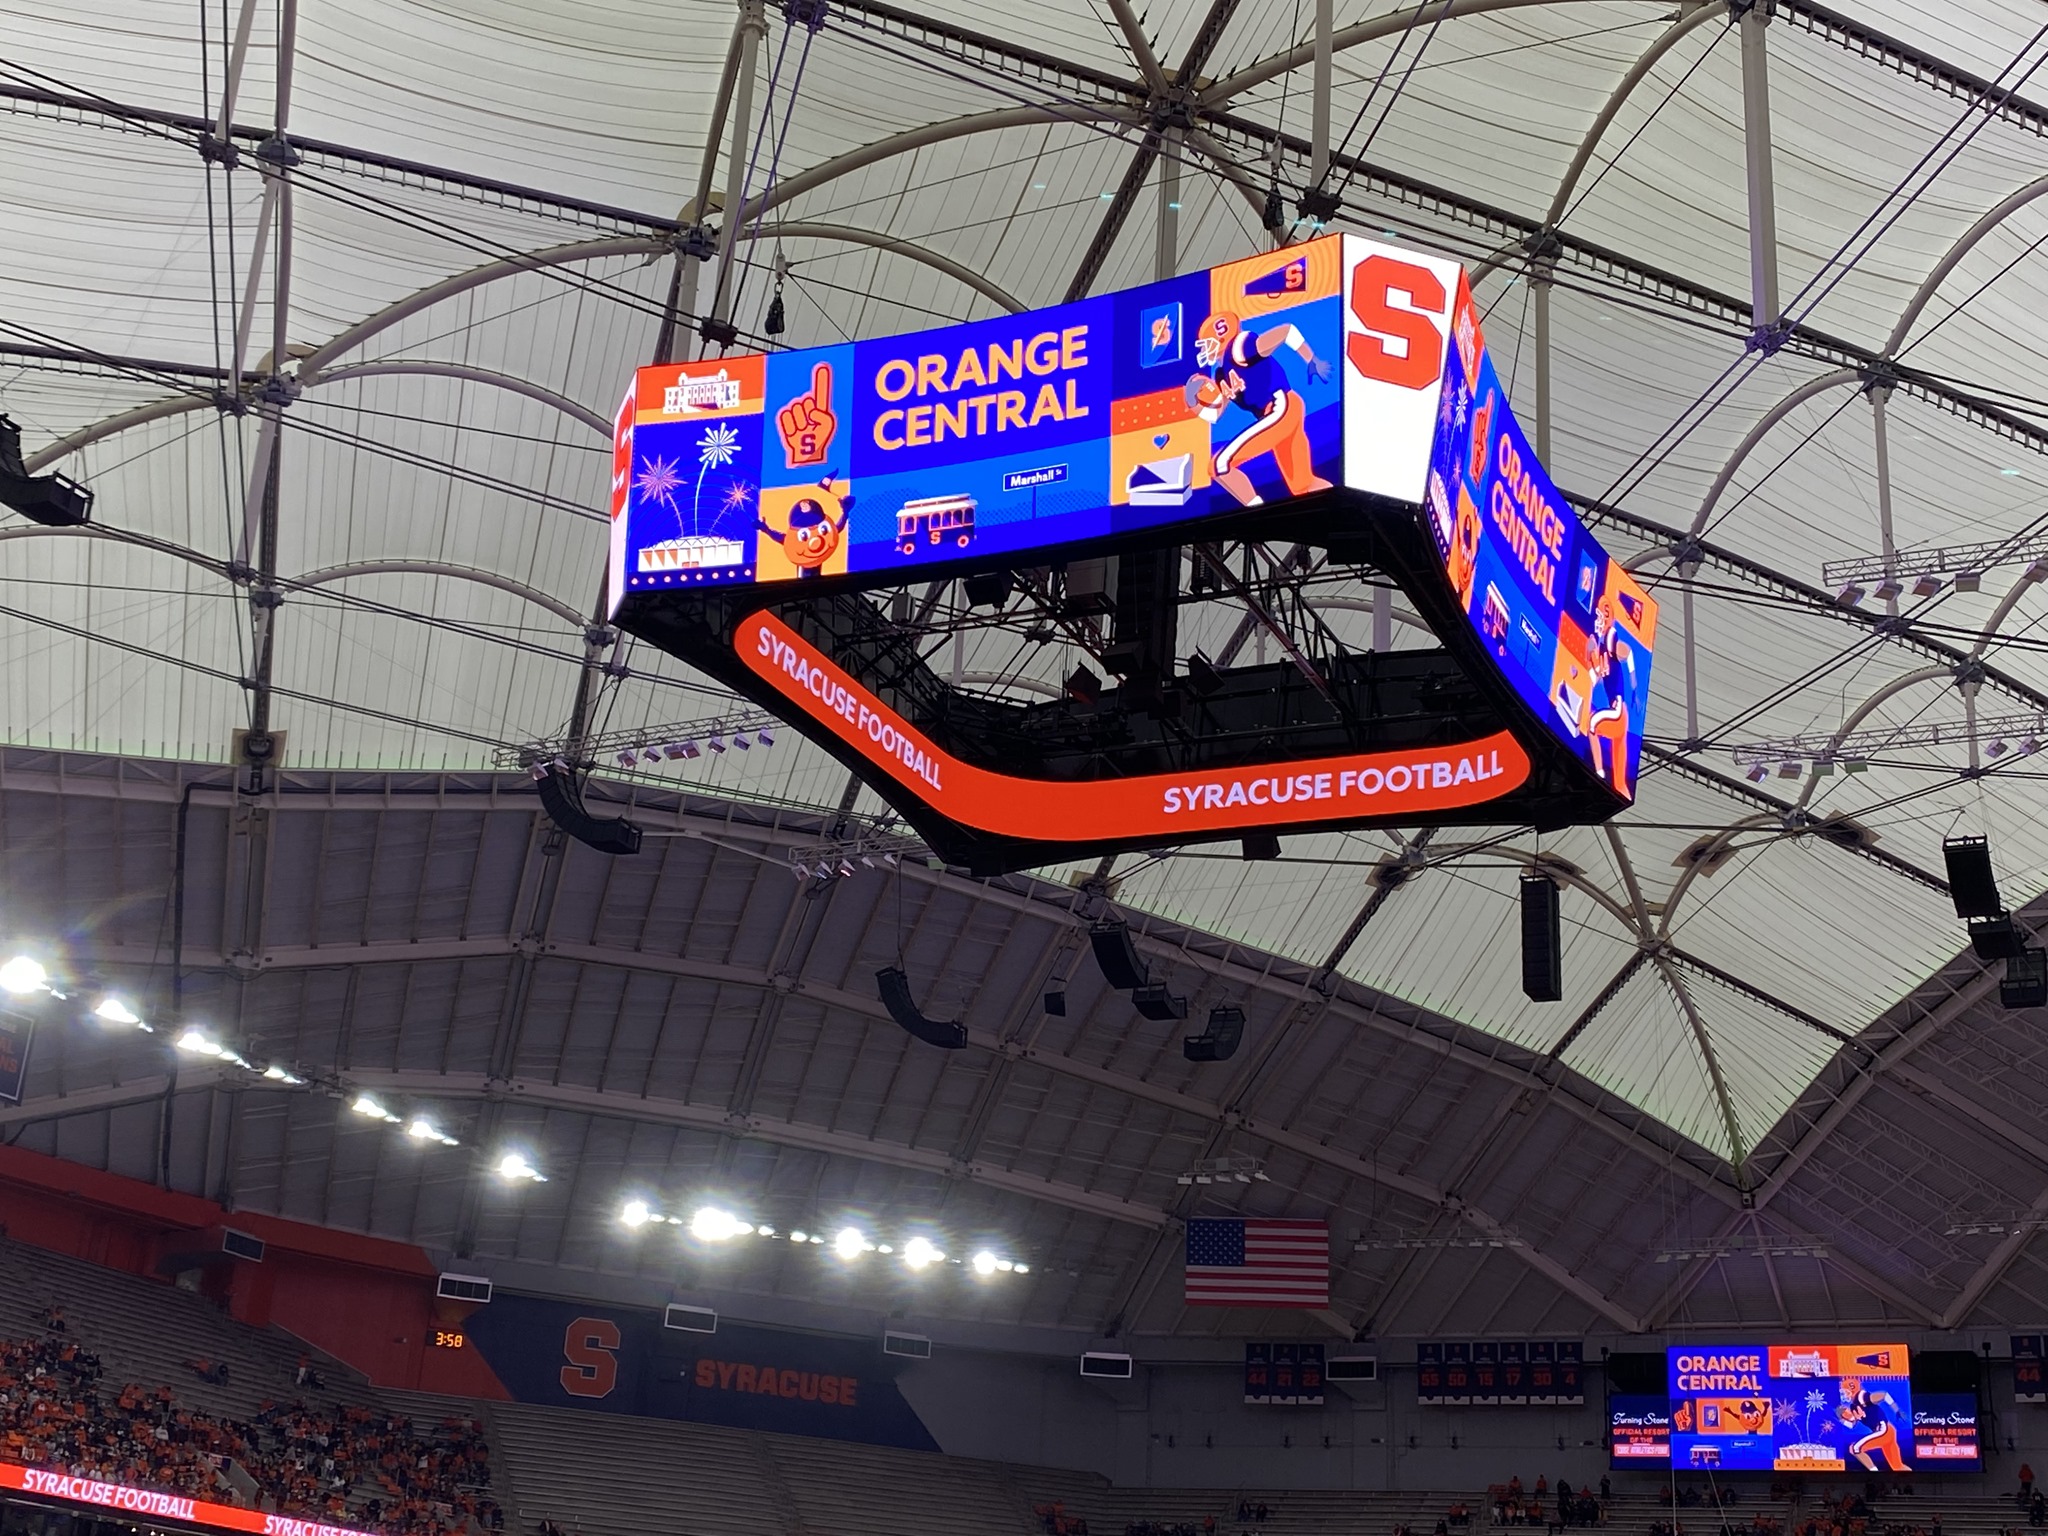 the scoreboard in the Stadium with Orange Central 2021 messaging